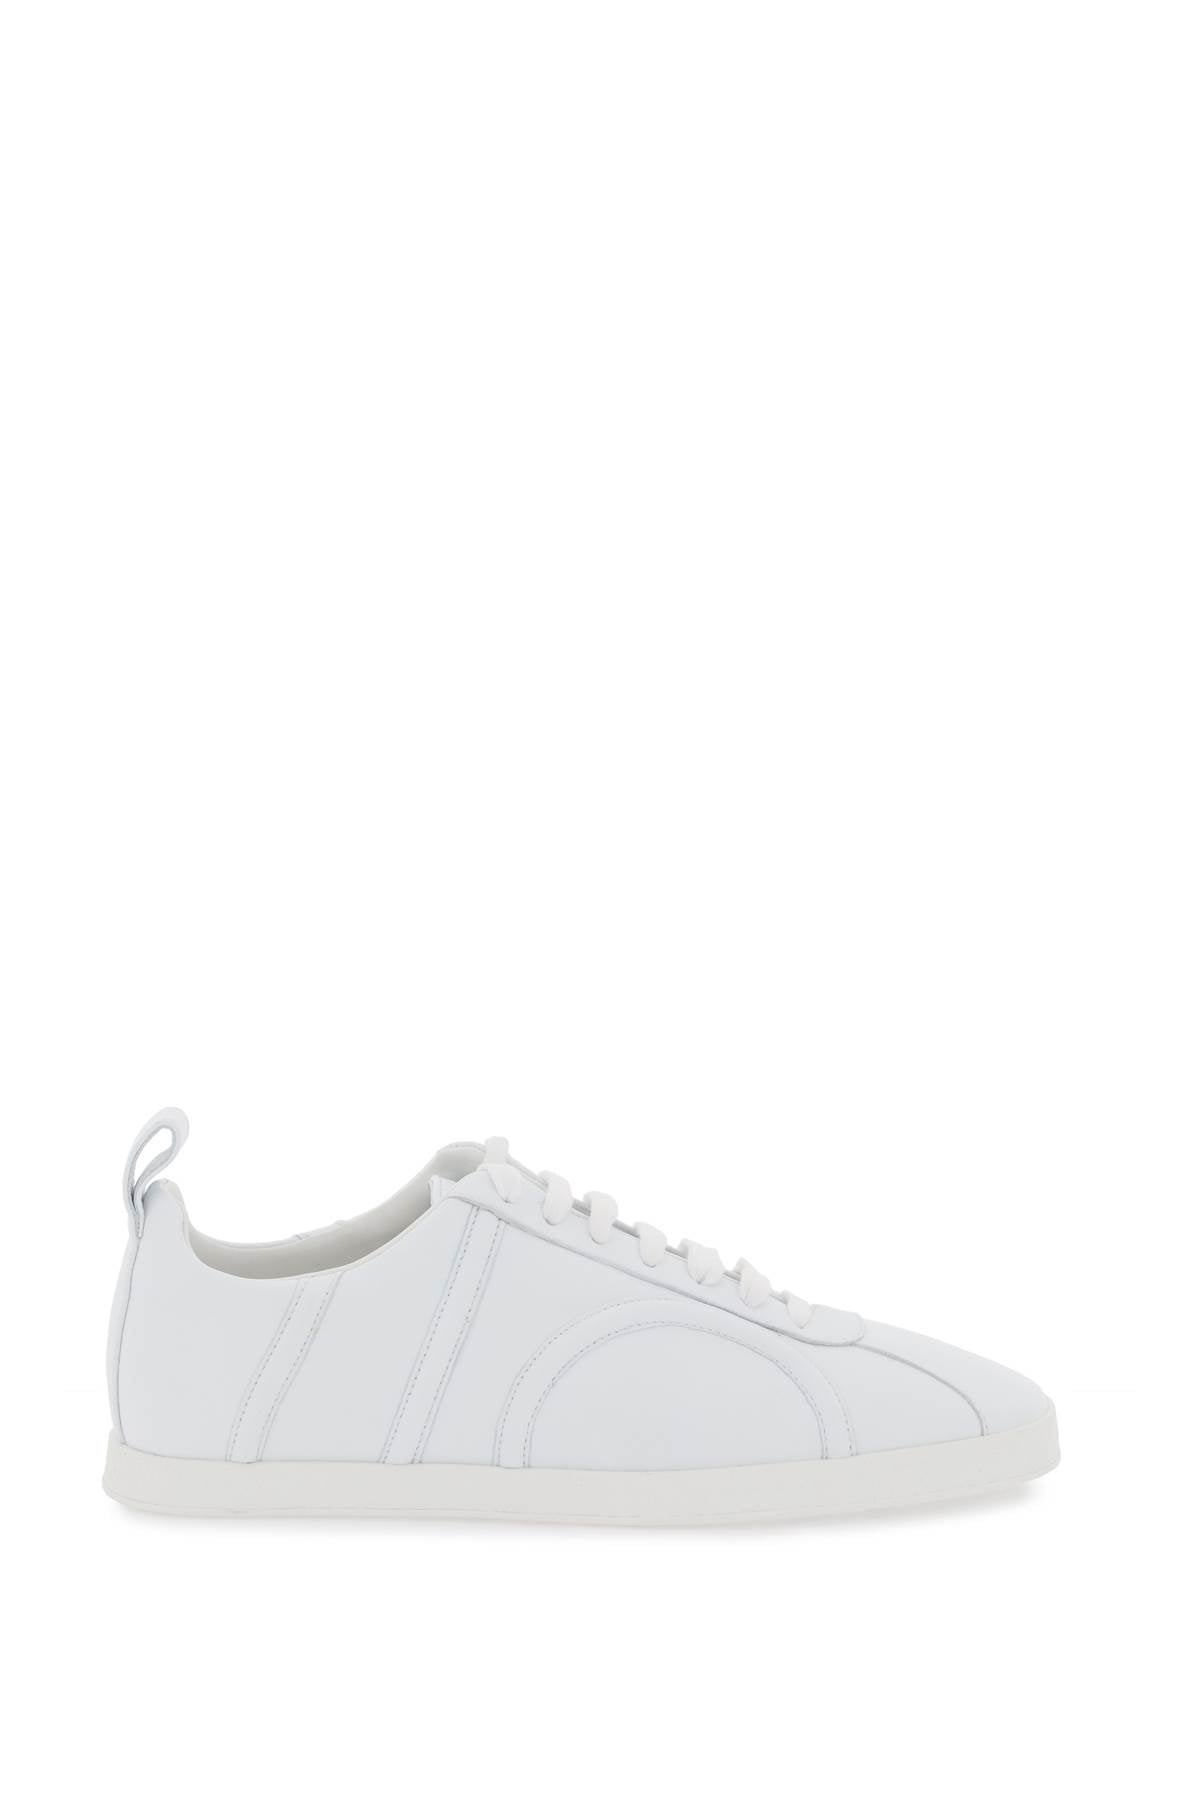 Toteme leather sneakers 233 912 819 WHITE